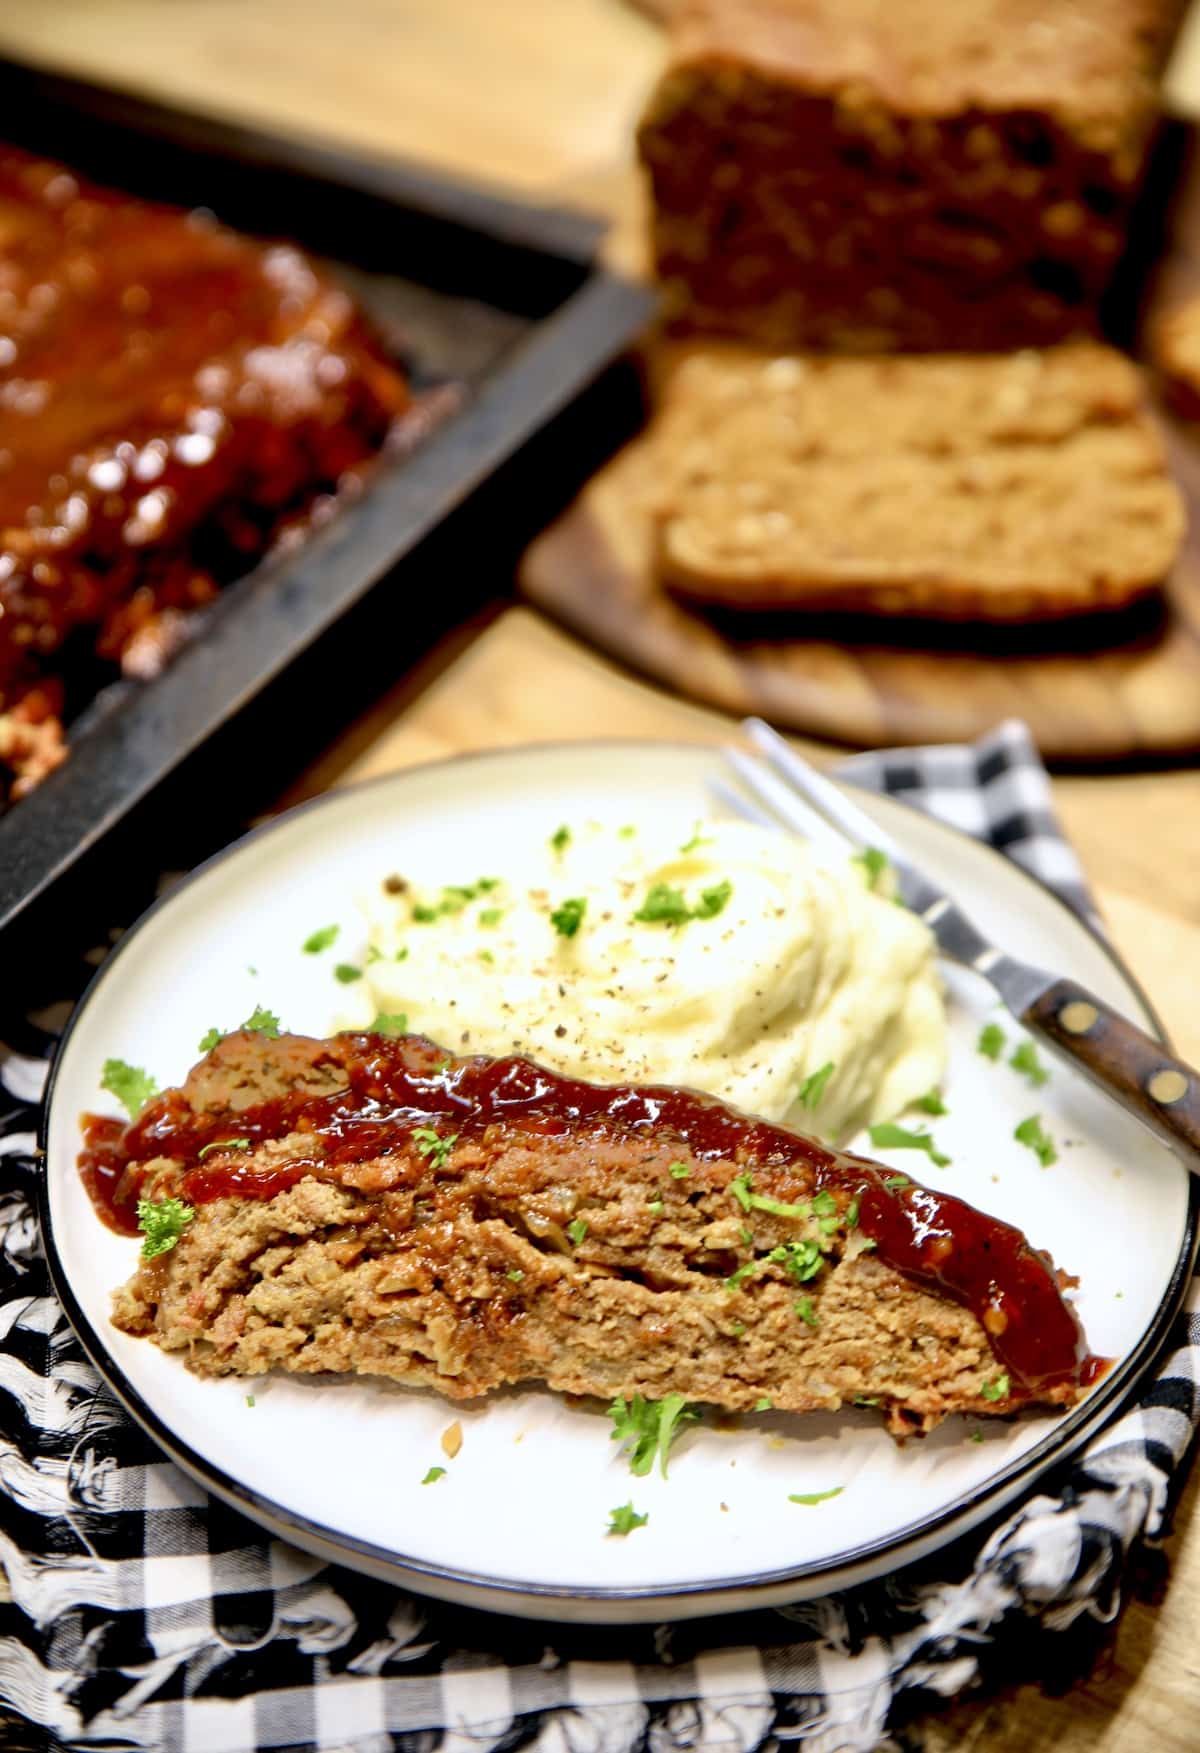 Meatloaf slices on a plate with mashed potatoes.